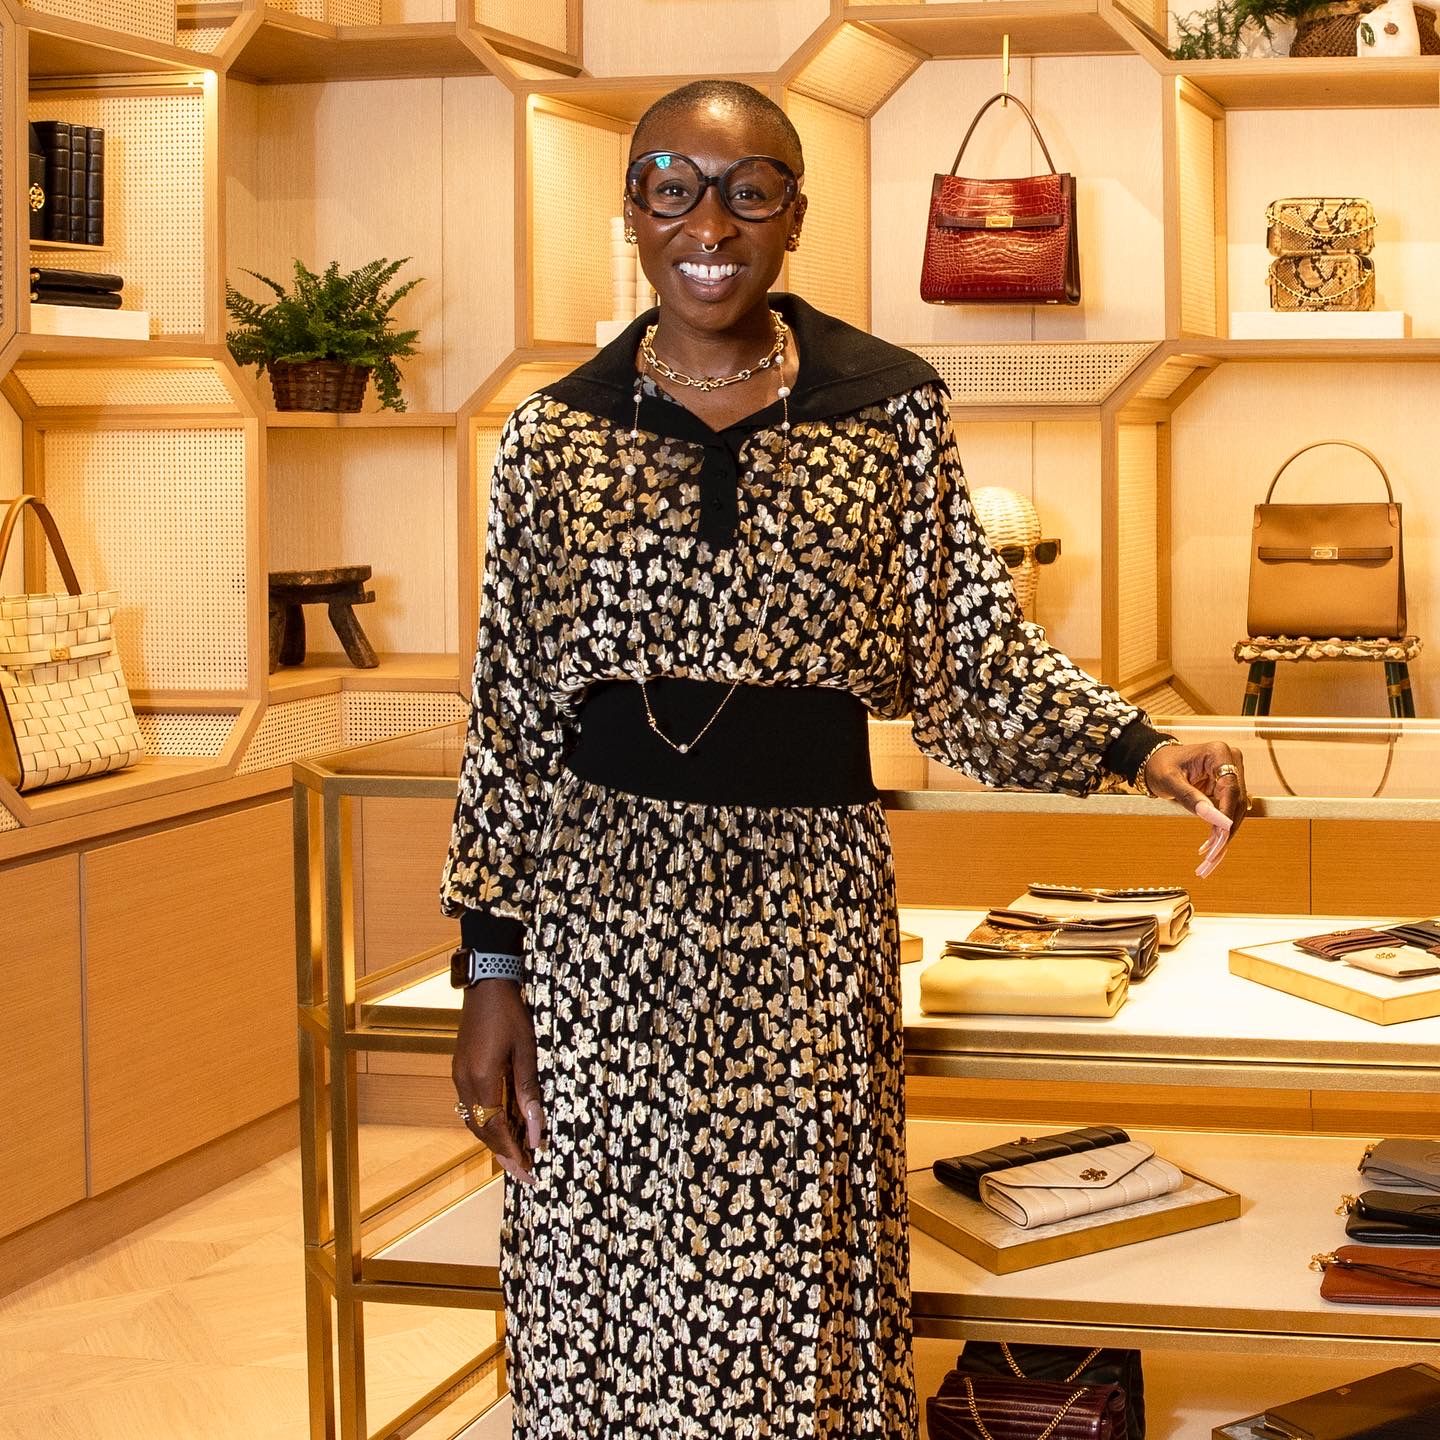 Cynthia Erivo Read Her New Children's Book to Kids at Storytime Event at Tory  Burch Store: Photo 4637055, Cynthia Erivo, Tory Burch Photos